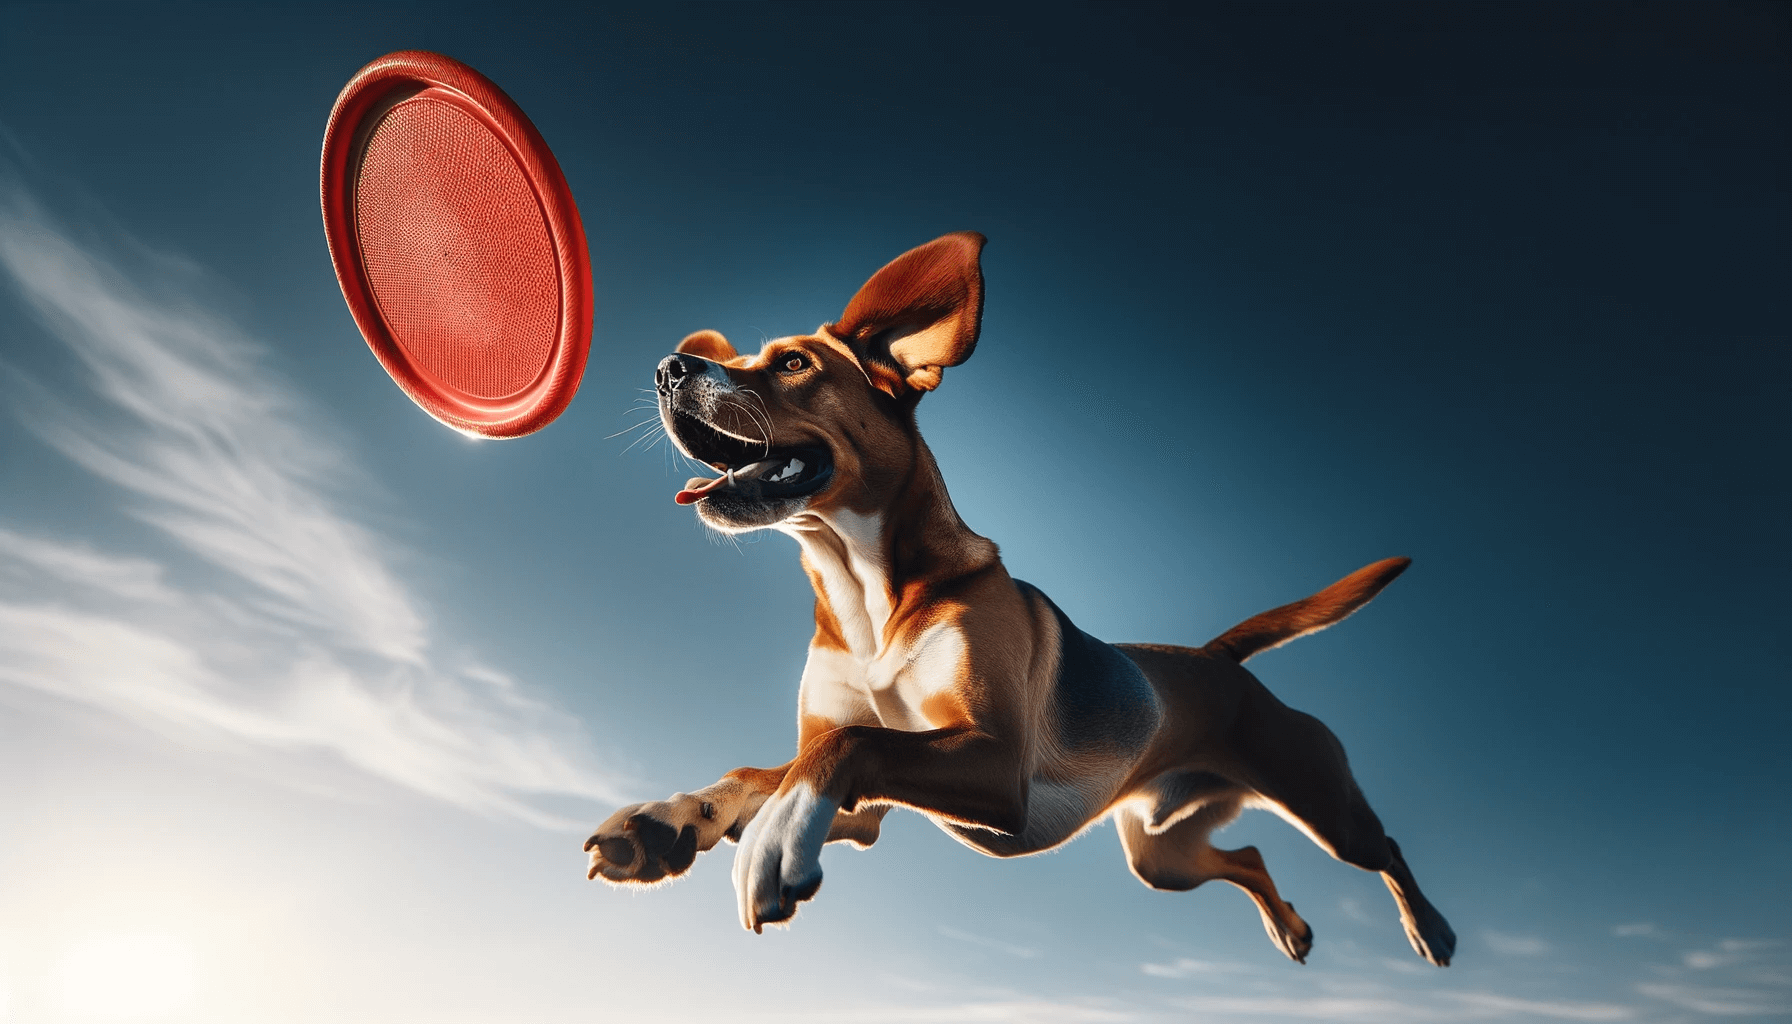 A Lab Hound Mix mid-leap, catching a frisbee with sheer joy